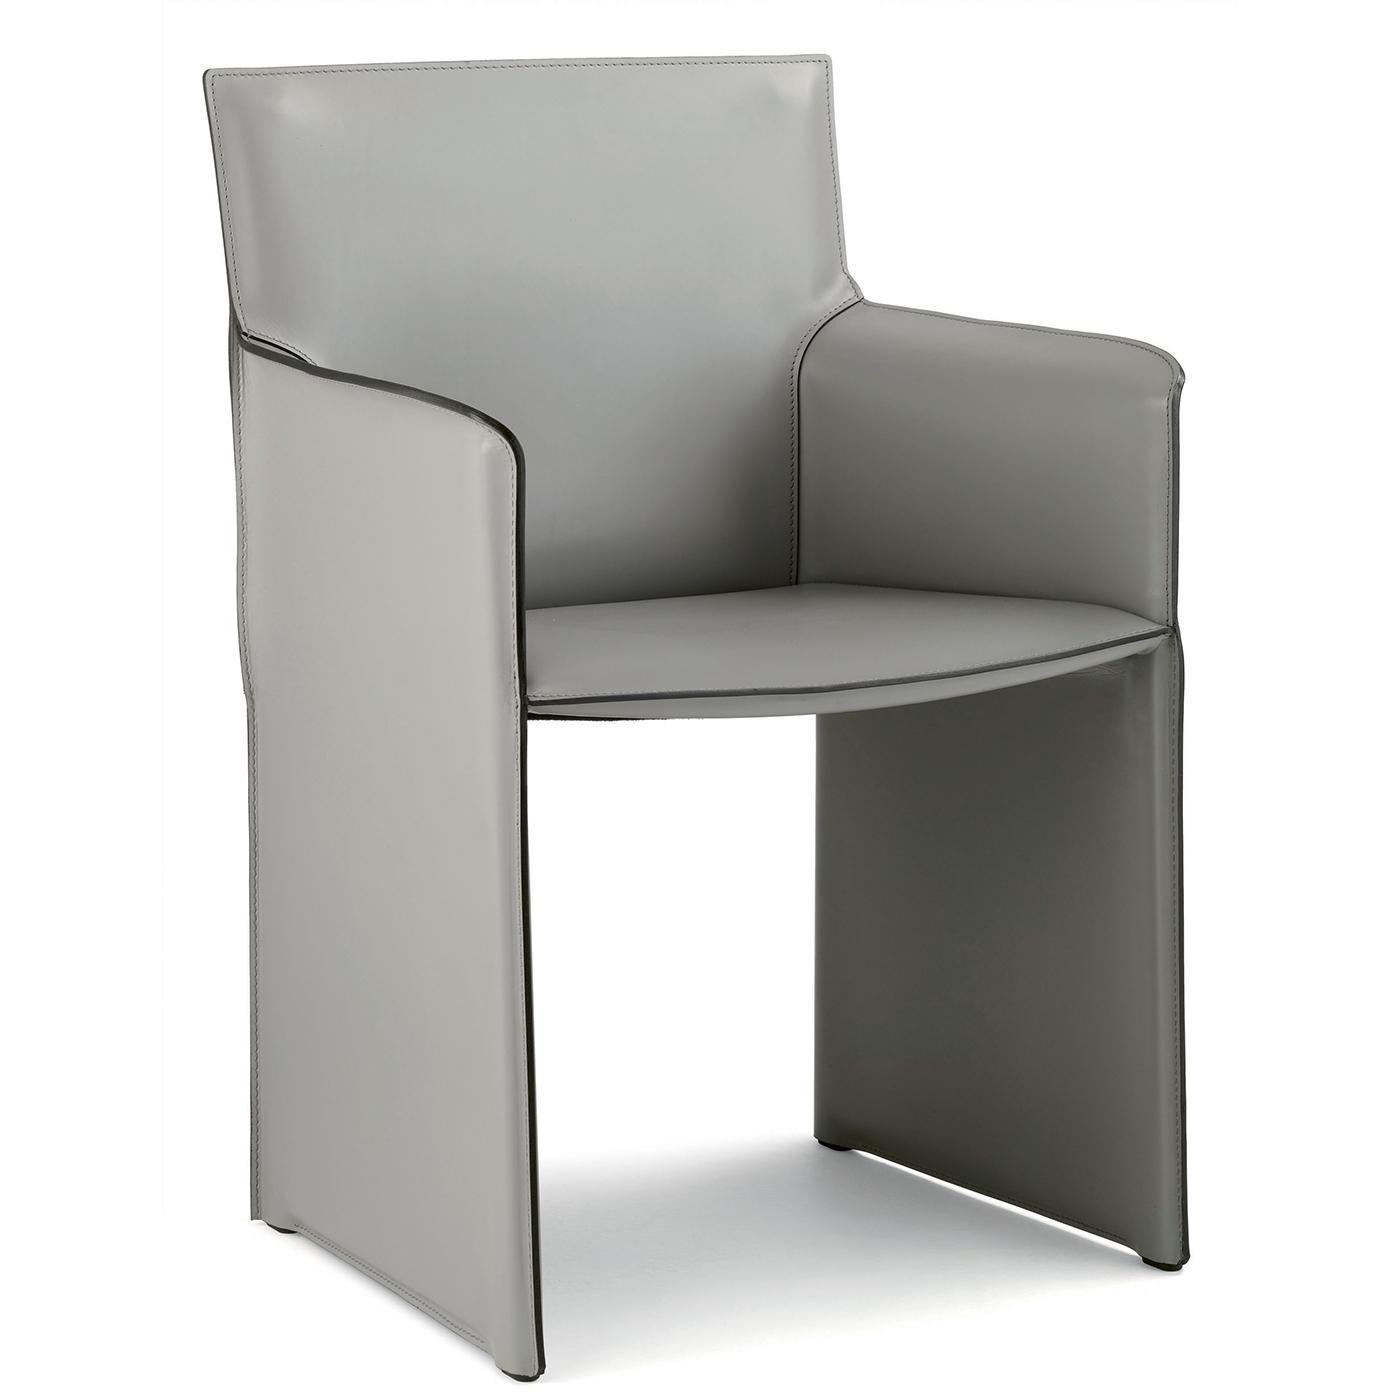 Italian Pasqualina Chair by Grassi&Bianchi For Sale